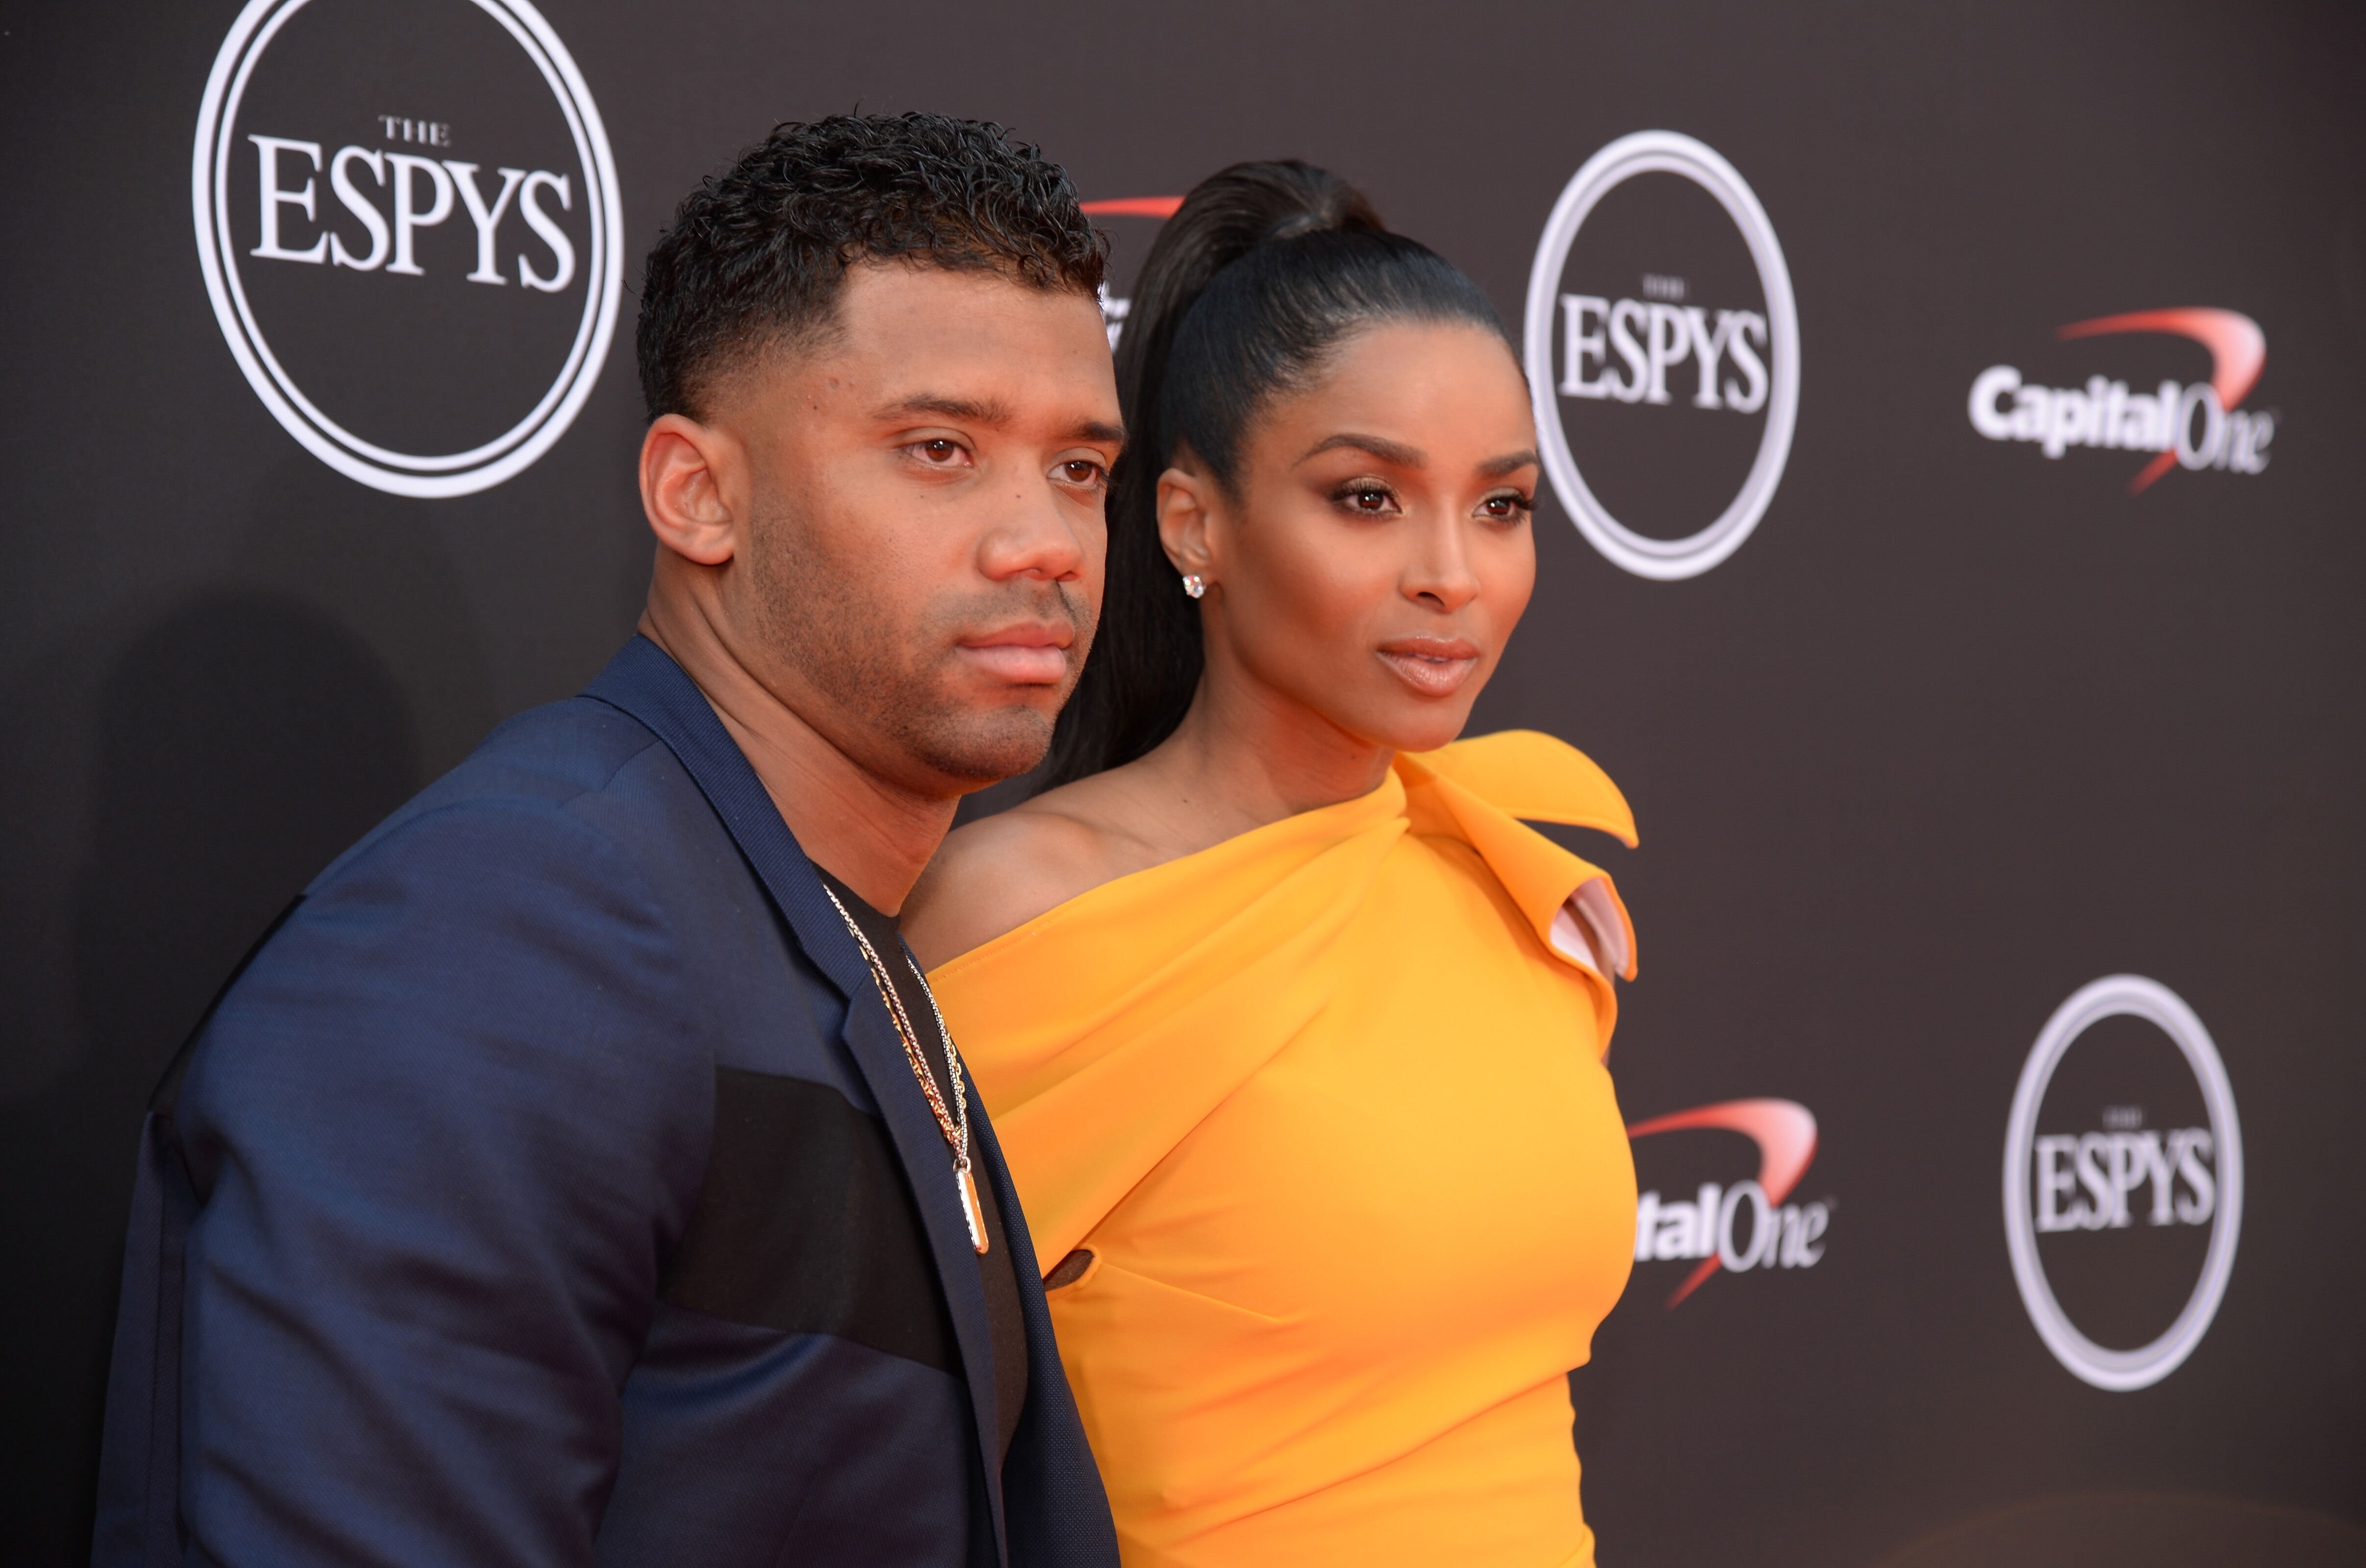 Singer Ciara and husband football player Russell Wilson attend the 2018 ESPY Awards Red Carpet Show Live! Celebrates With Moet & Chandon at Microsoft Theater on July 18, 2018 | Photo: Getty Images